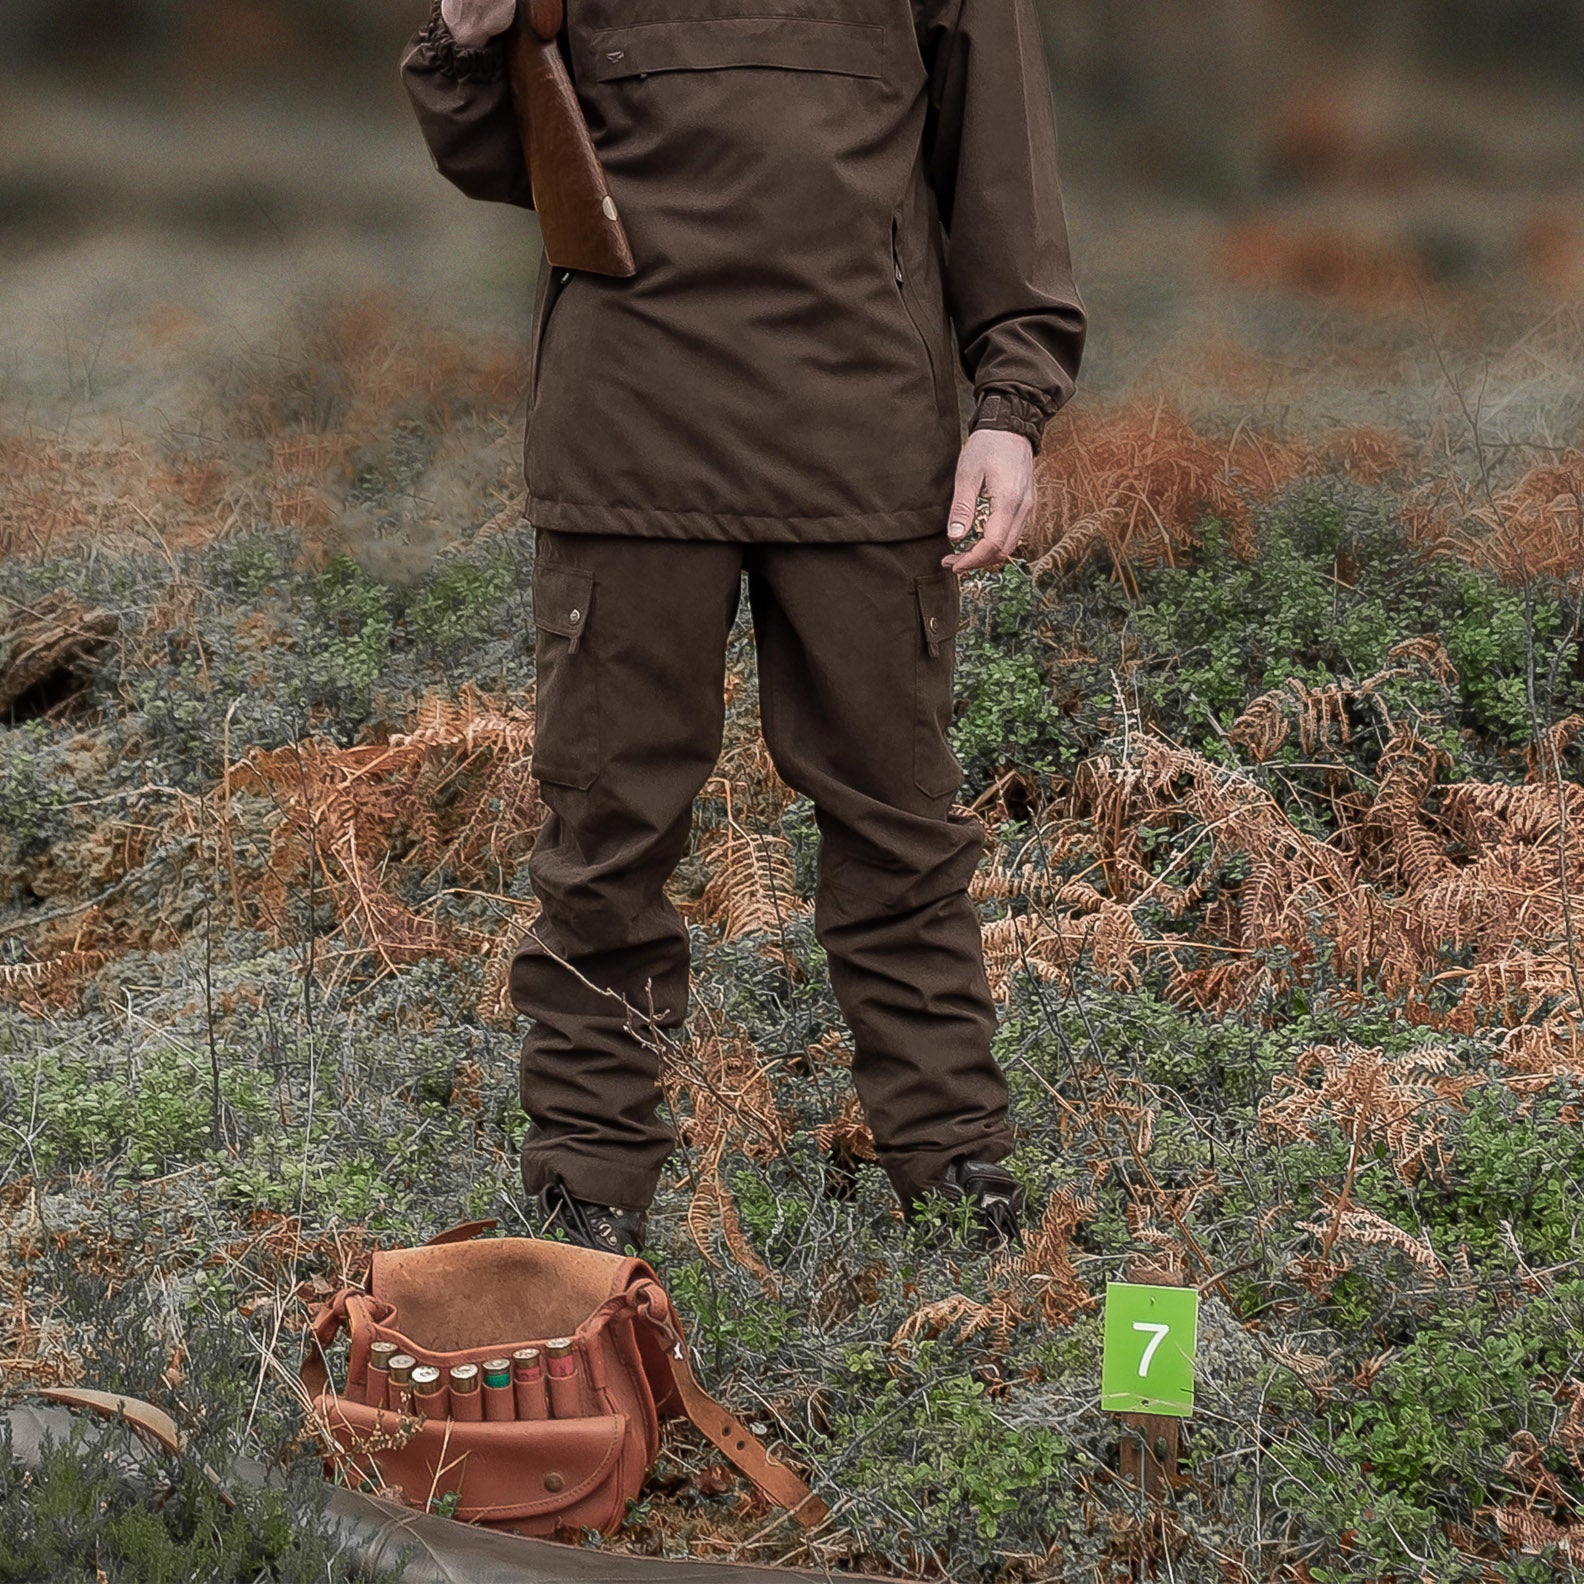 Beating in tough terrain  what to wear  Cherry Tree Country Clothing